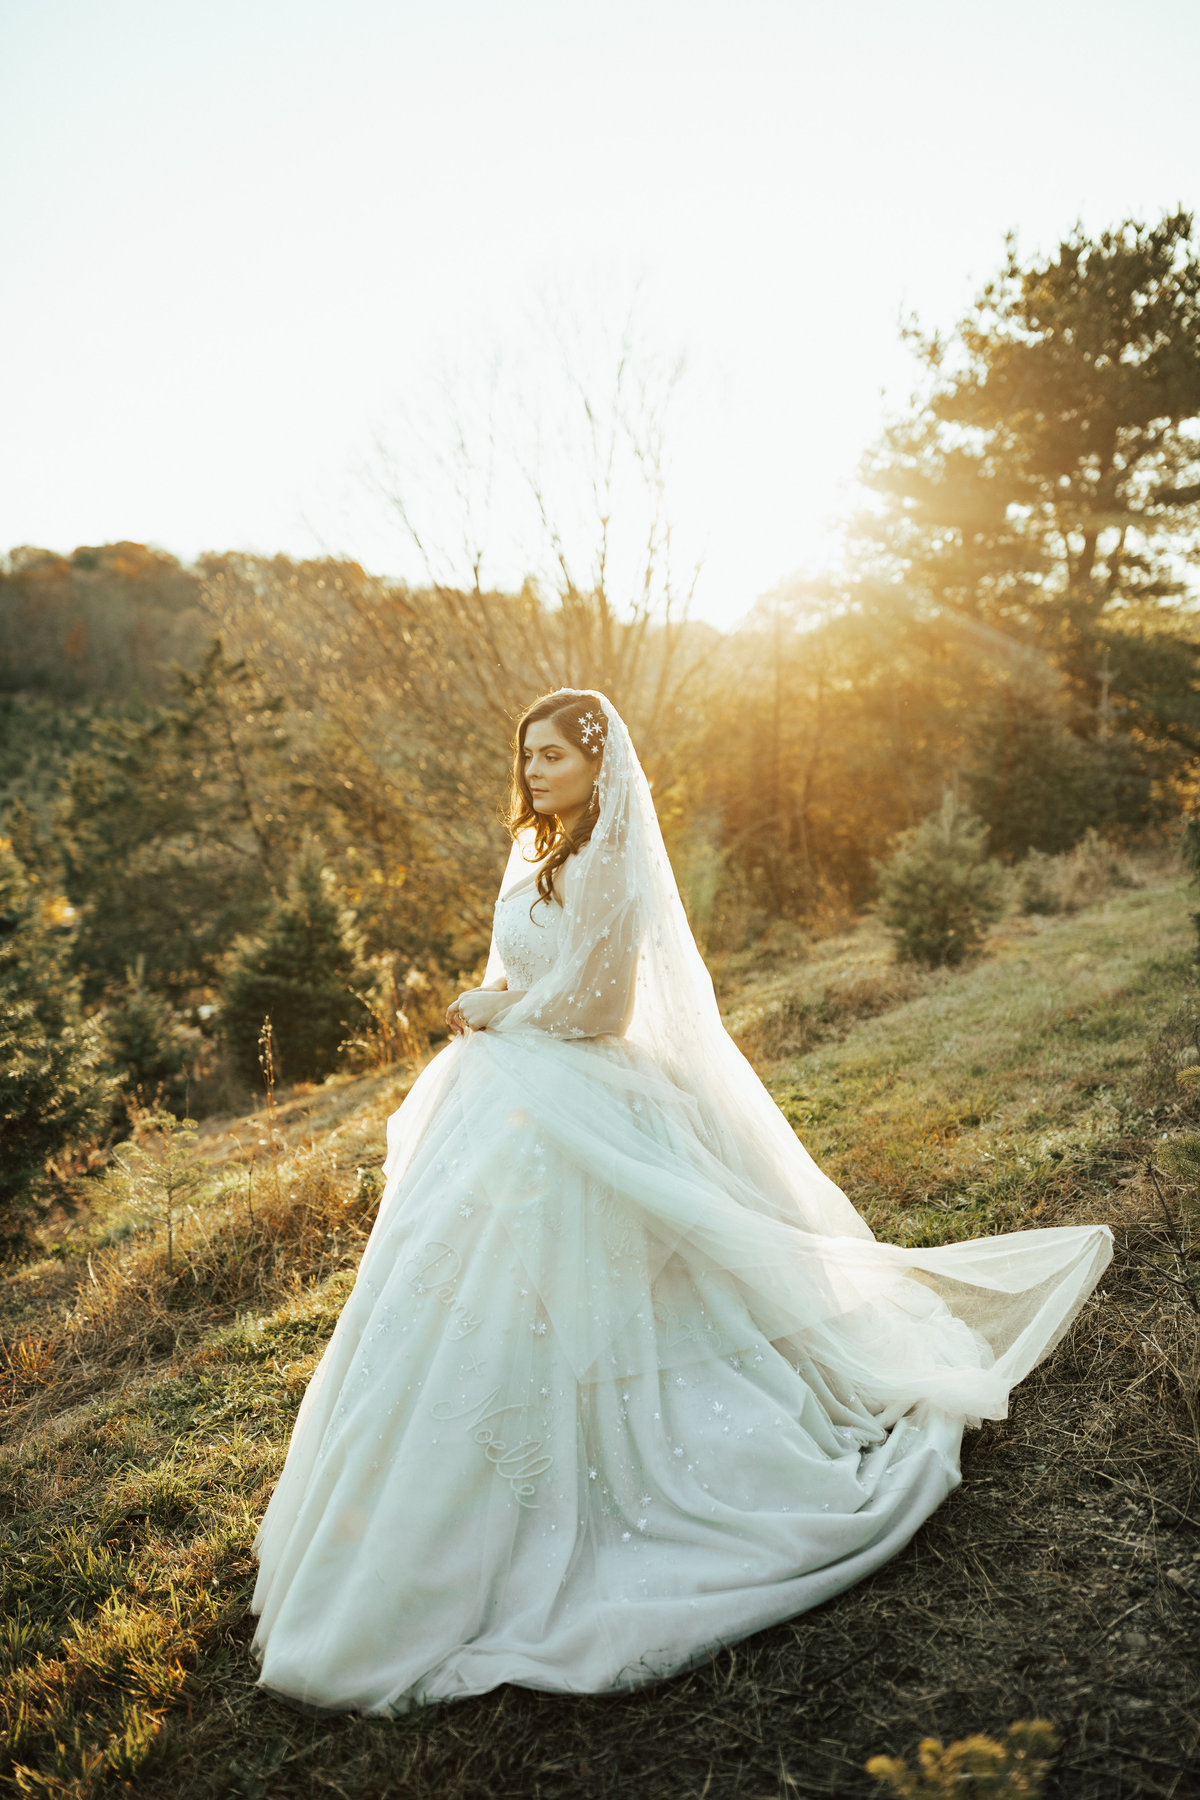 Christy-l-Johnston-Photography-Monica-Relyea-Events-Noelle-Downing-Instagram-Noelle_s-Favorite-Day-Wedding-Battenfelds-Christmas-tree-farm-Red-Hook-New-York-Hudson-Valley-upstate-november-2019-AP1A8798